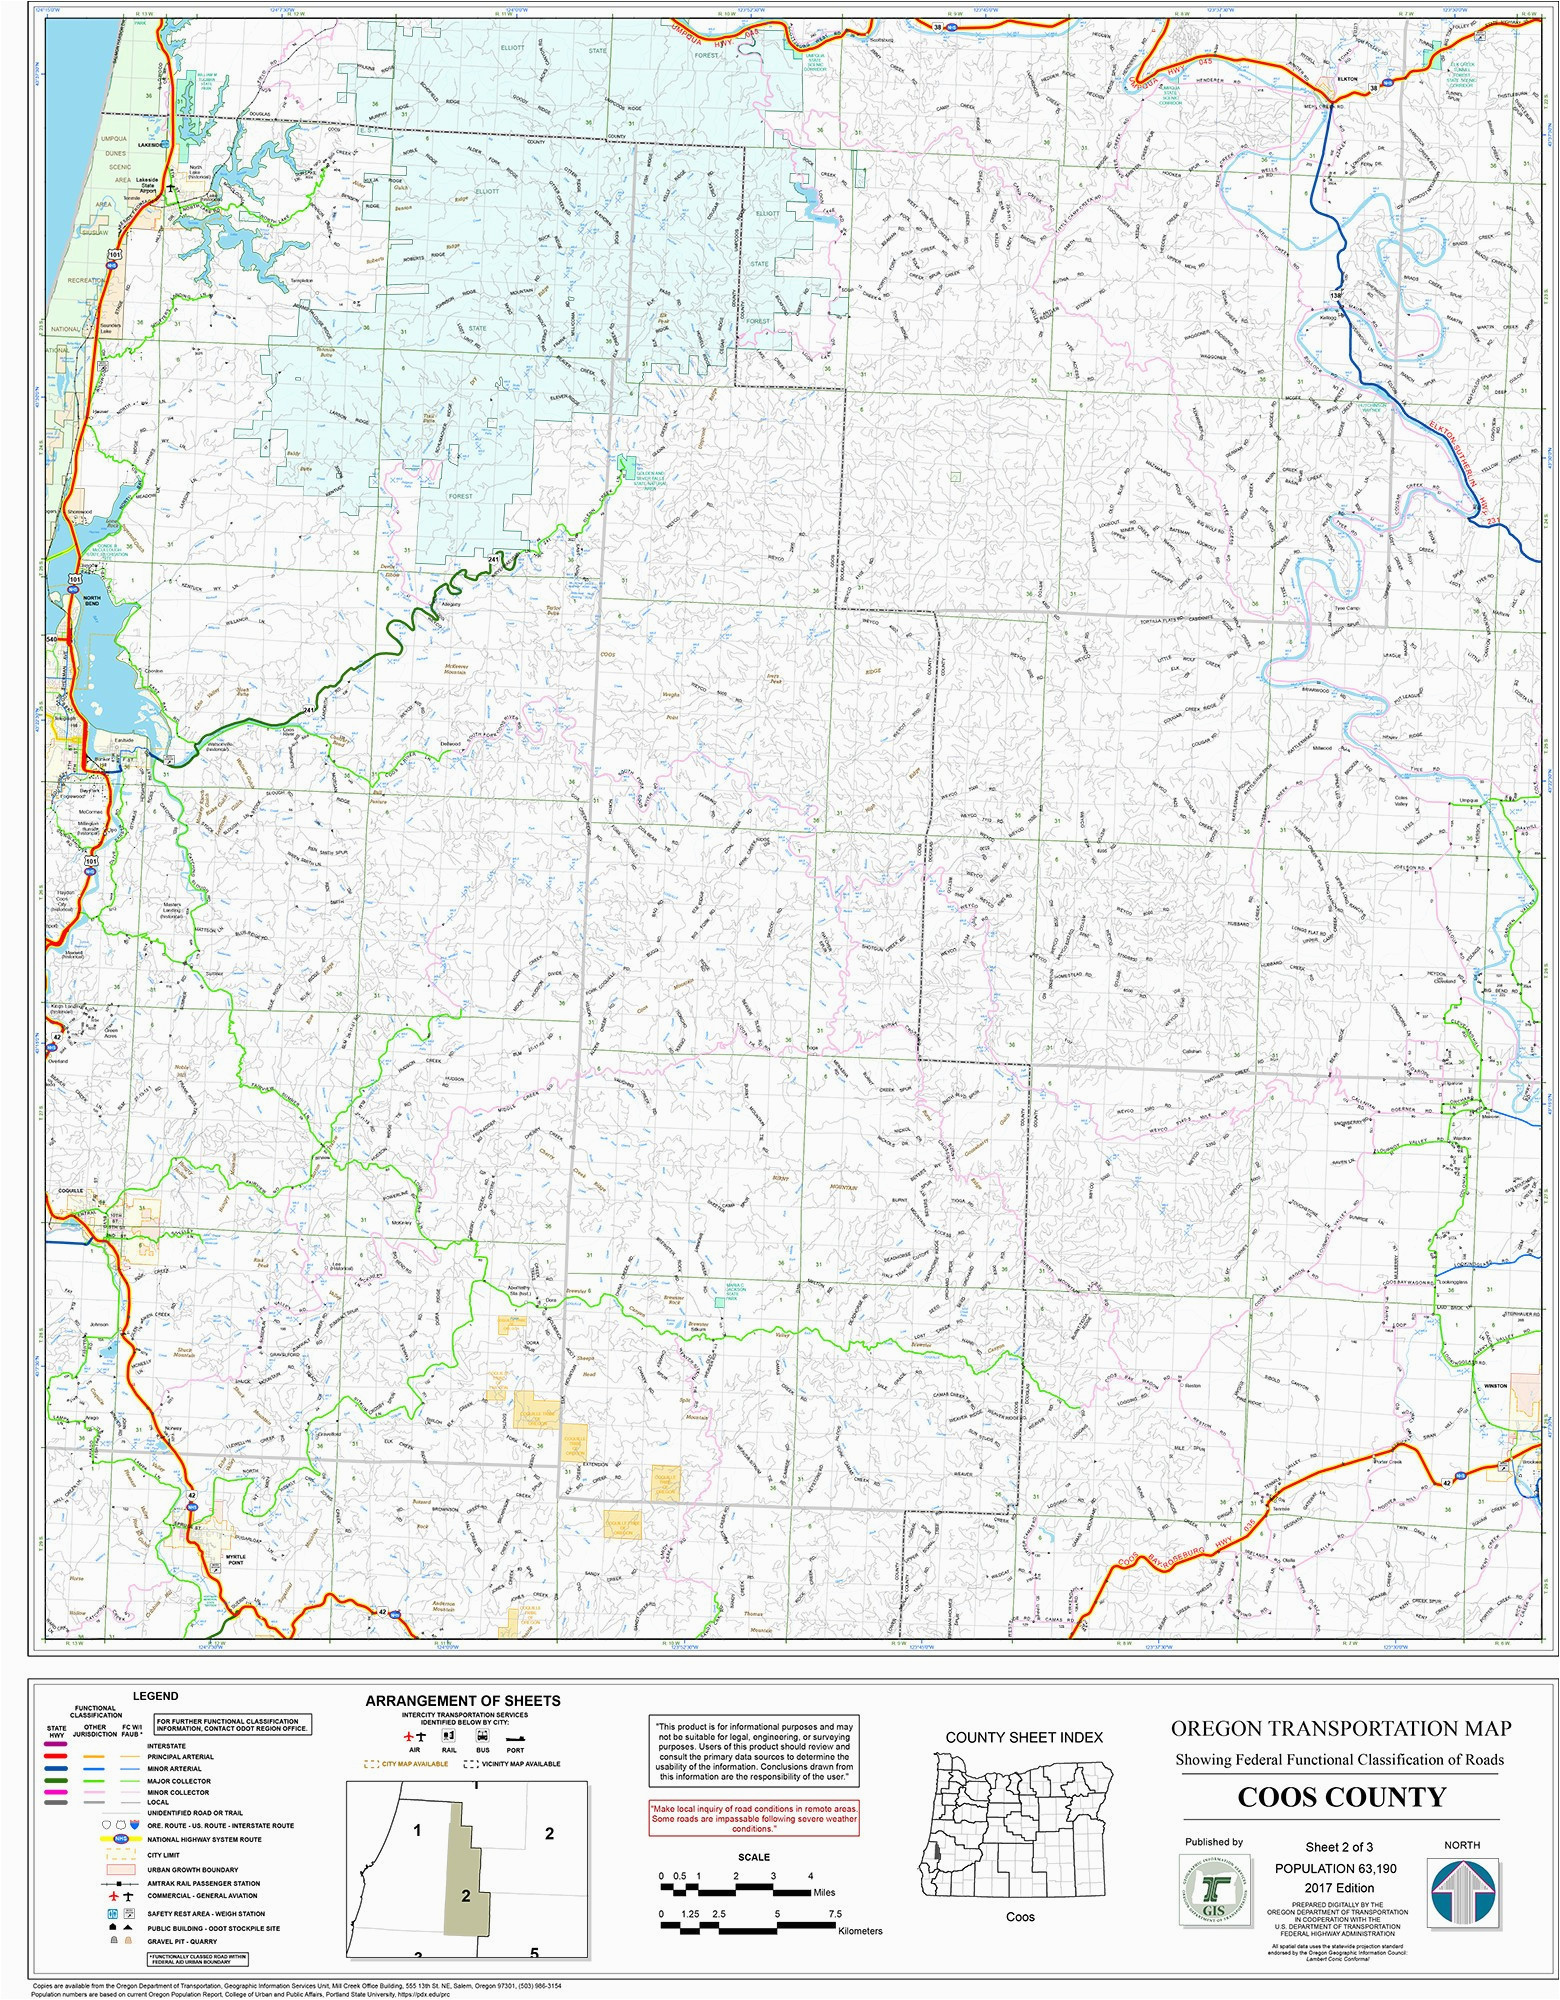 Tennessee Elevation Map Google Maps topography Maps Driving Directions